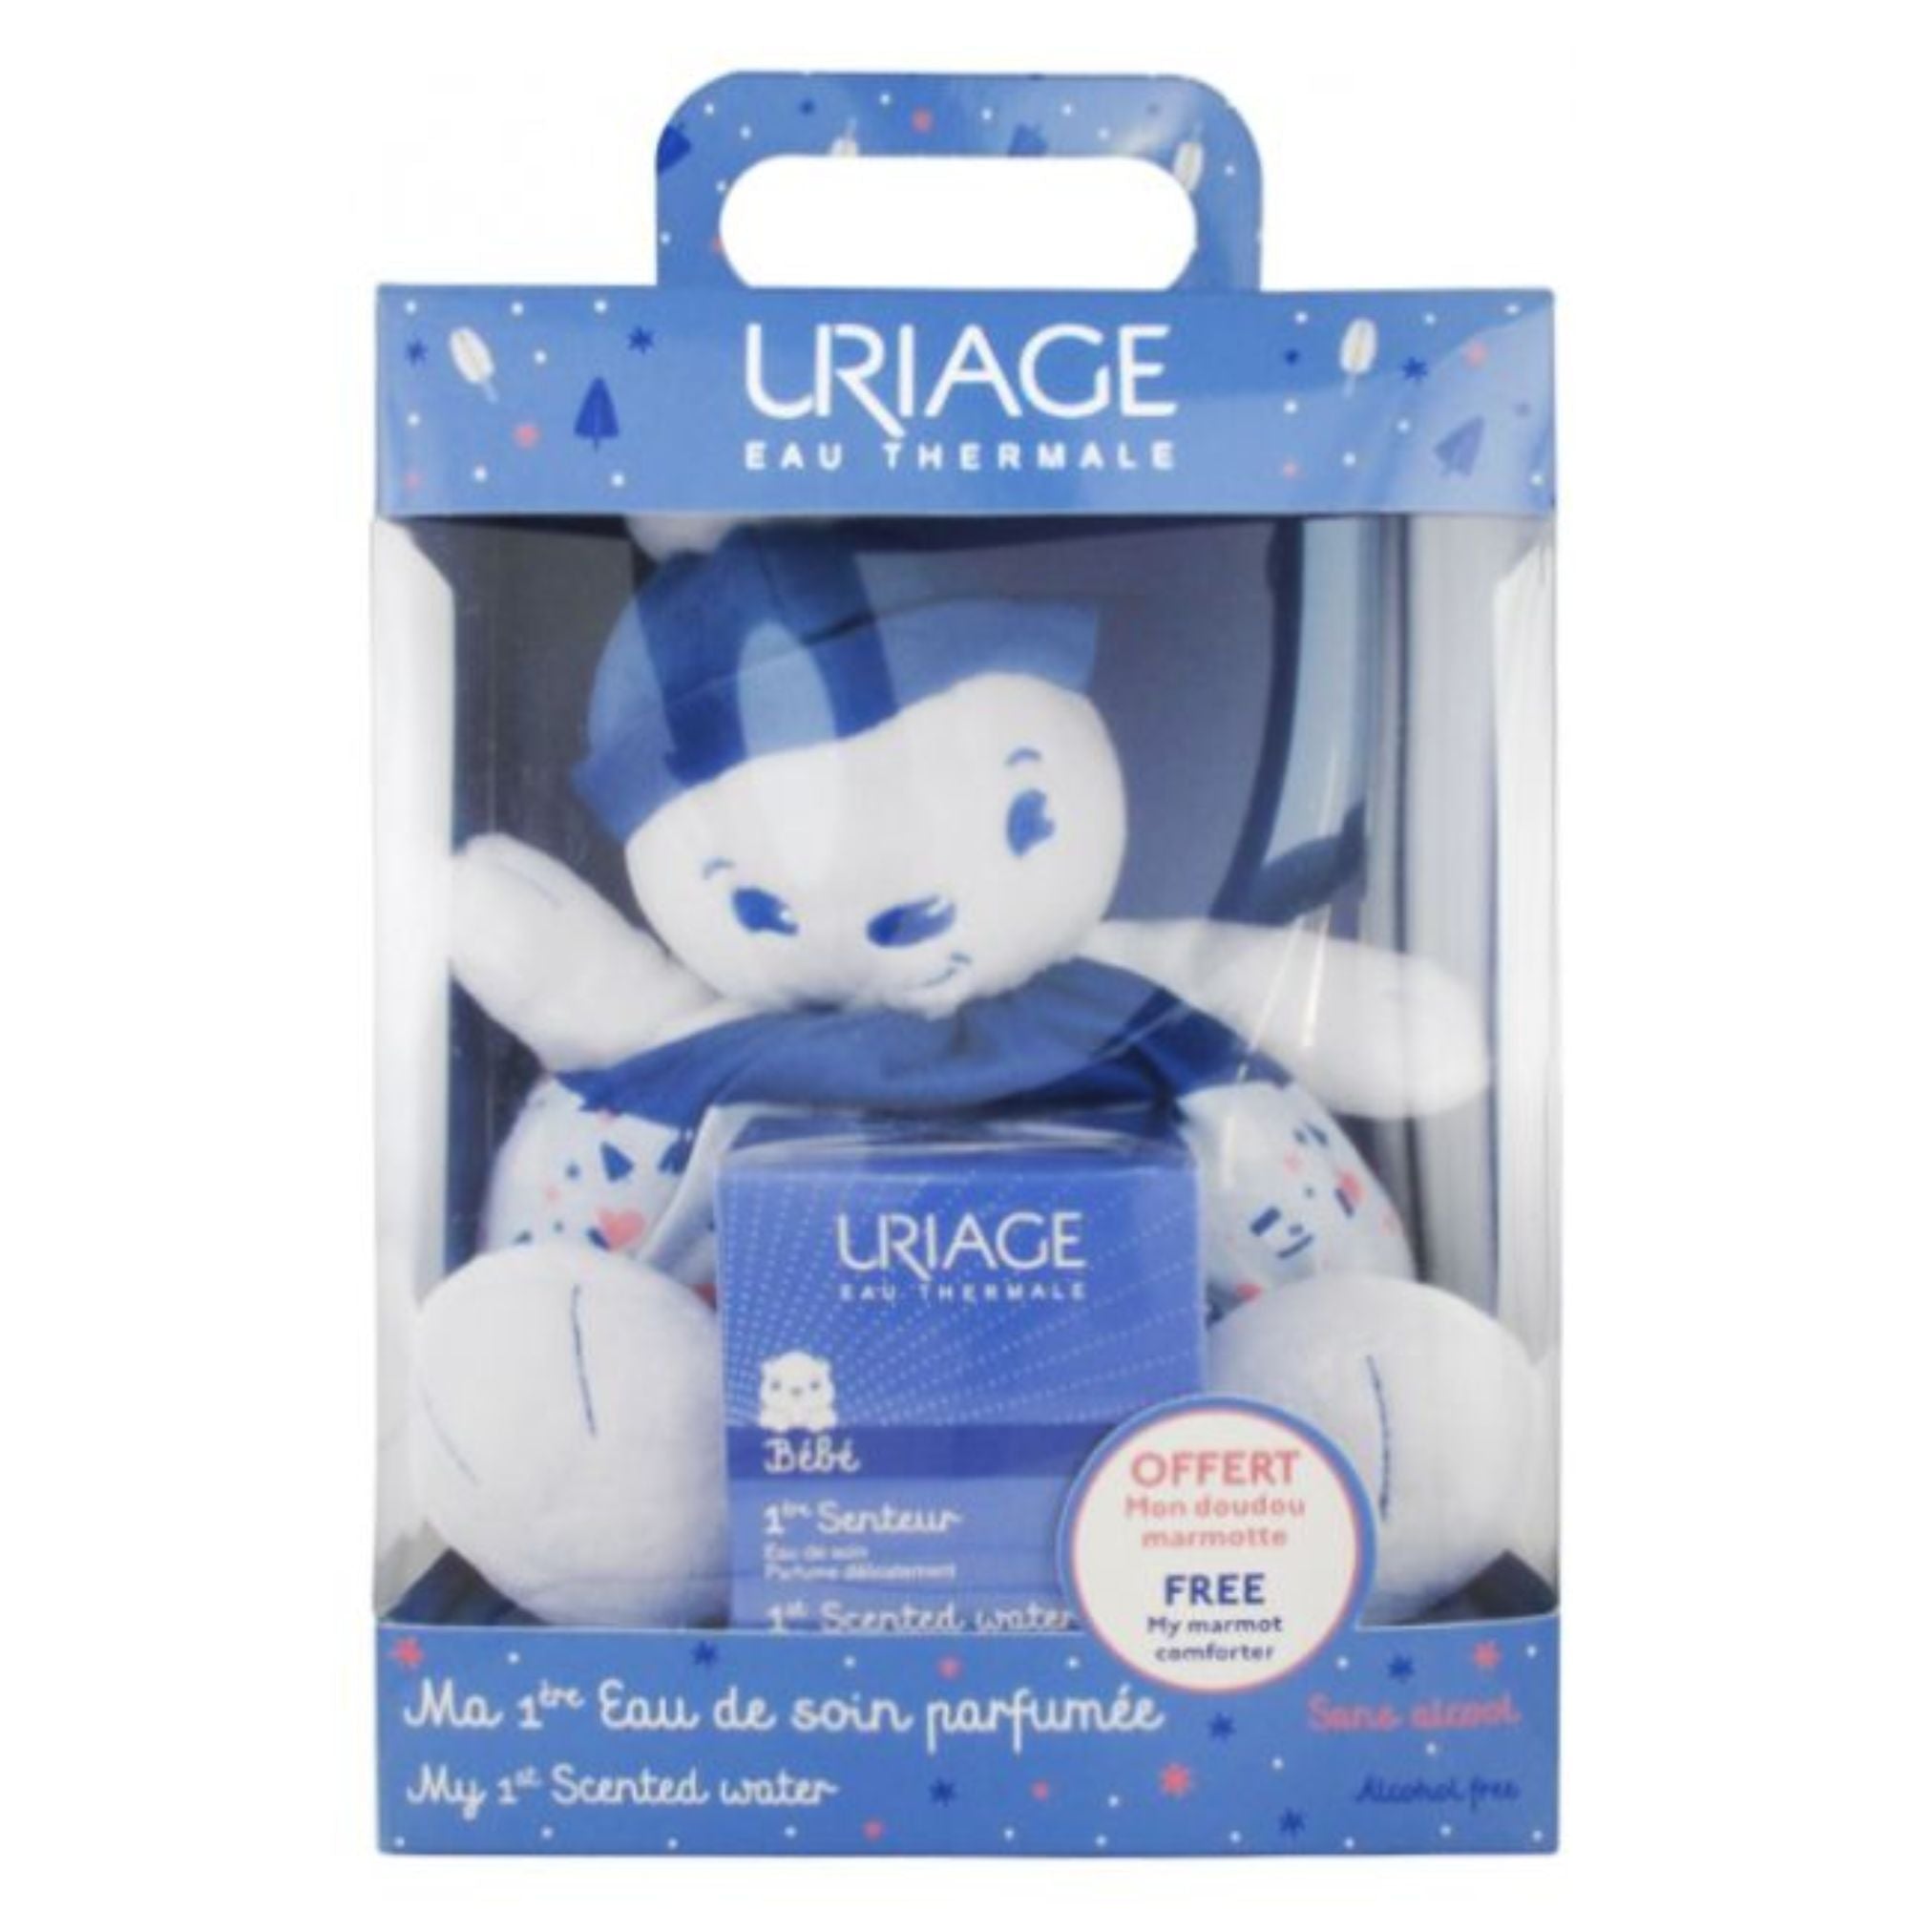 Uriage Promo Pack: Uriage 1st Scented Water 50ml + Teddy Bear